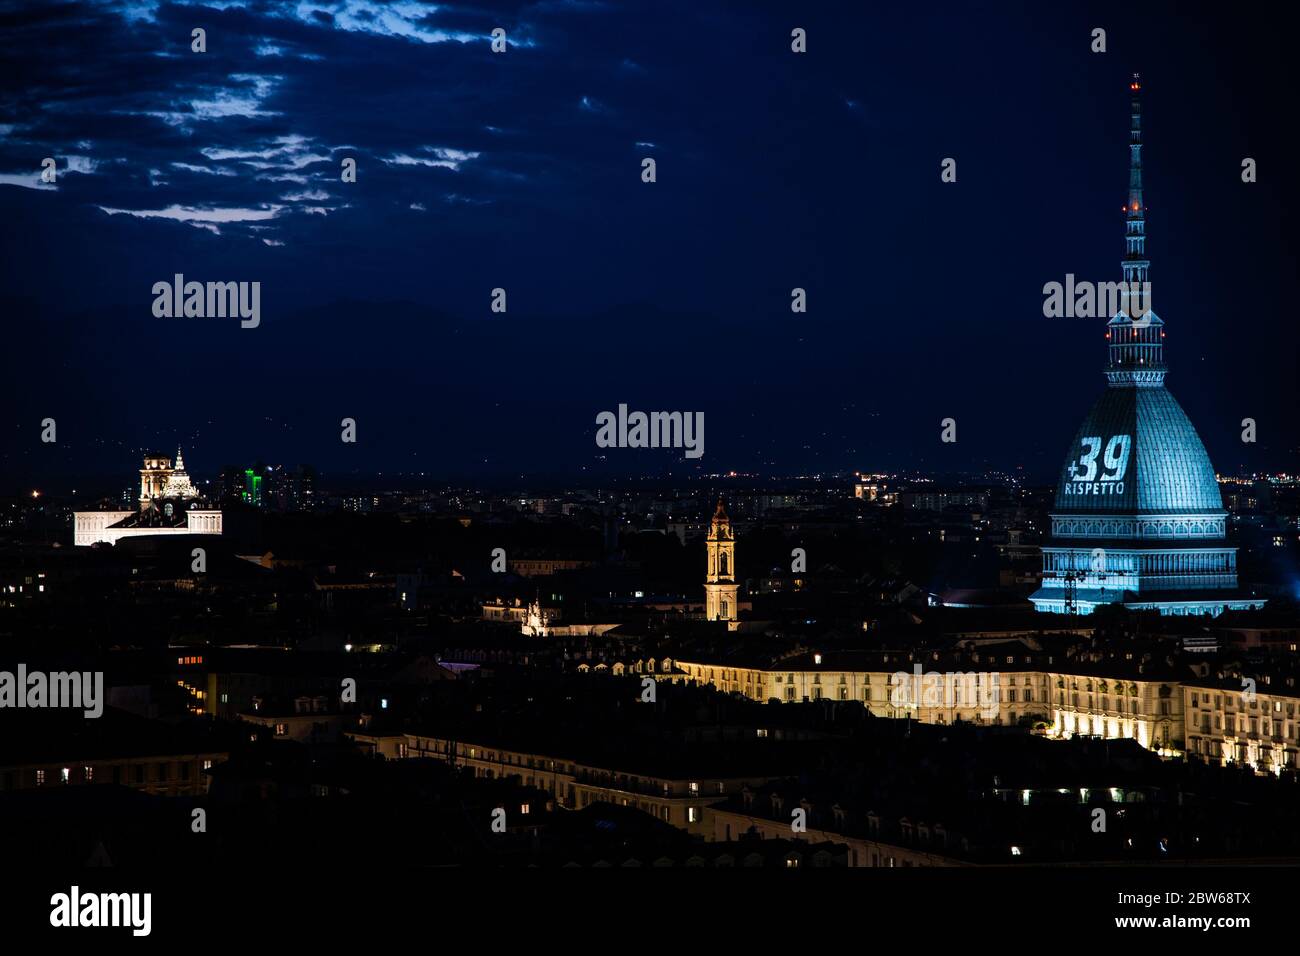 Turin, Italy. 29th May, 2020. A general view of the Mole Antonelliana illuminated in honour of the victims of the Heysel Stadium disaster in Turin. On May 29, 1985, 39 died and 600 were injured at Heysel Stadium prior to the European Cup Final between Juventus and Liverpool, when escaping Juventus fans were crushed against a wall that eventually collapsed, after trouble that broke out between supporters lead to a charge by Liverpool fans. (Photo by Cris Faga/Pacific Press) Credit: Pacific Press Agency/Alamy Live News Stock Photo